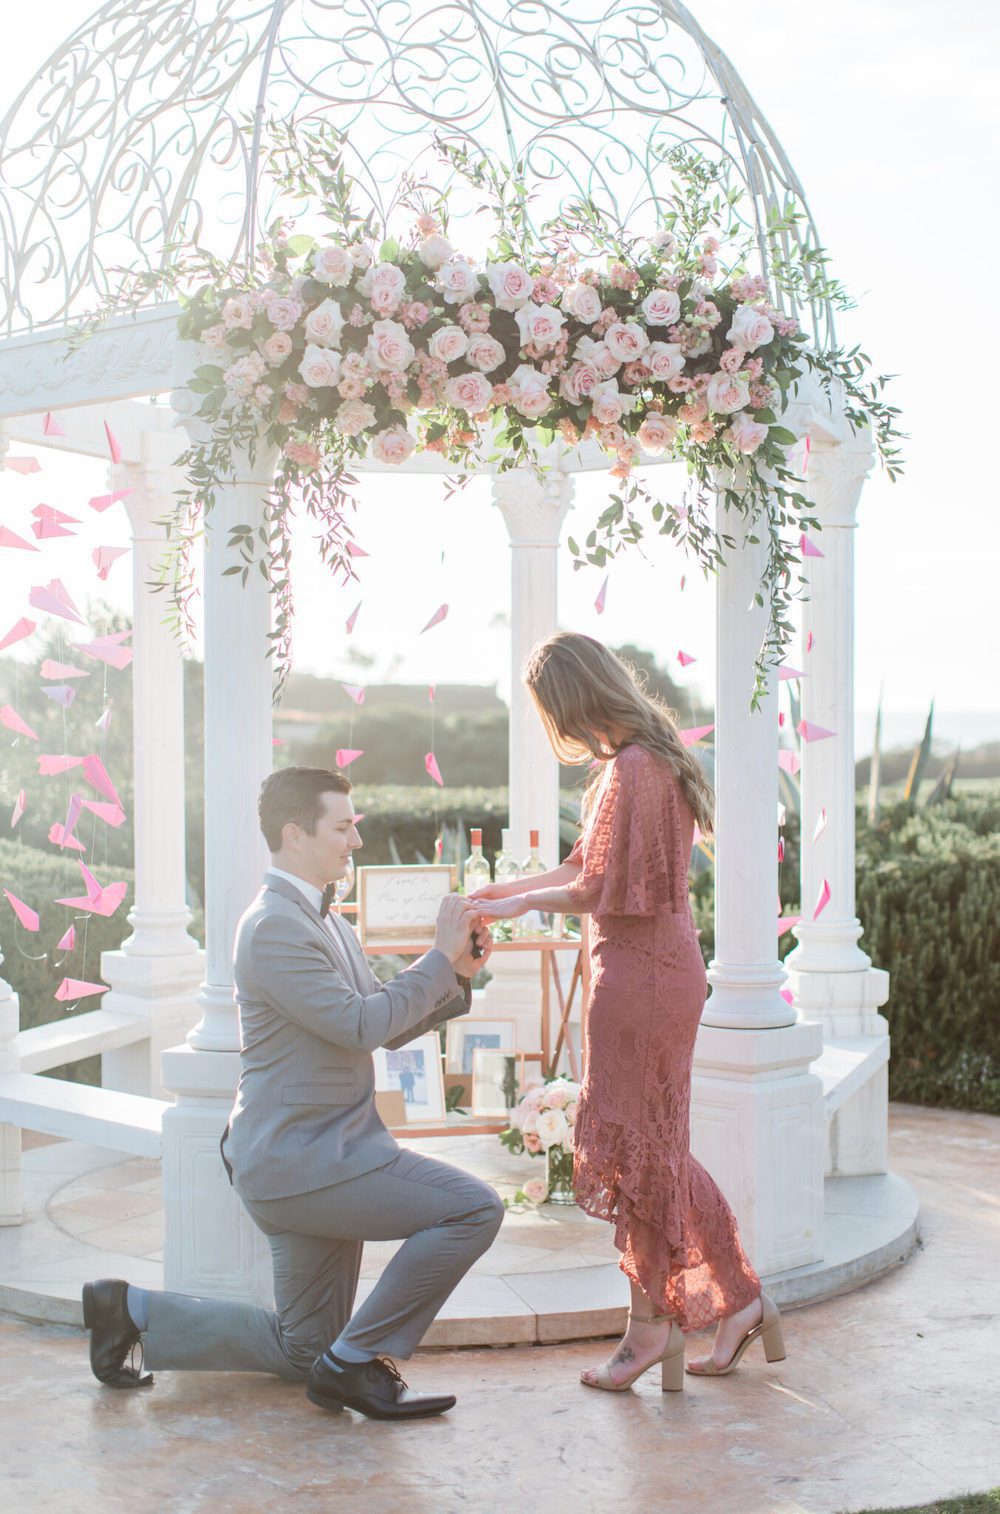 Amazing Marriage Proposal Ideas at Waldorf Astoria Monarch Beach by The Yes Girls